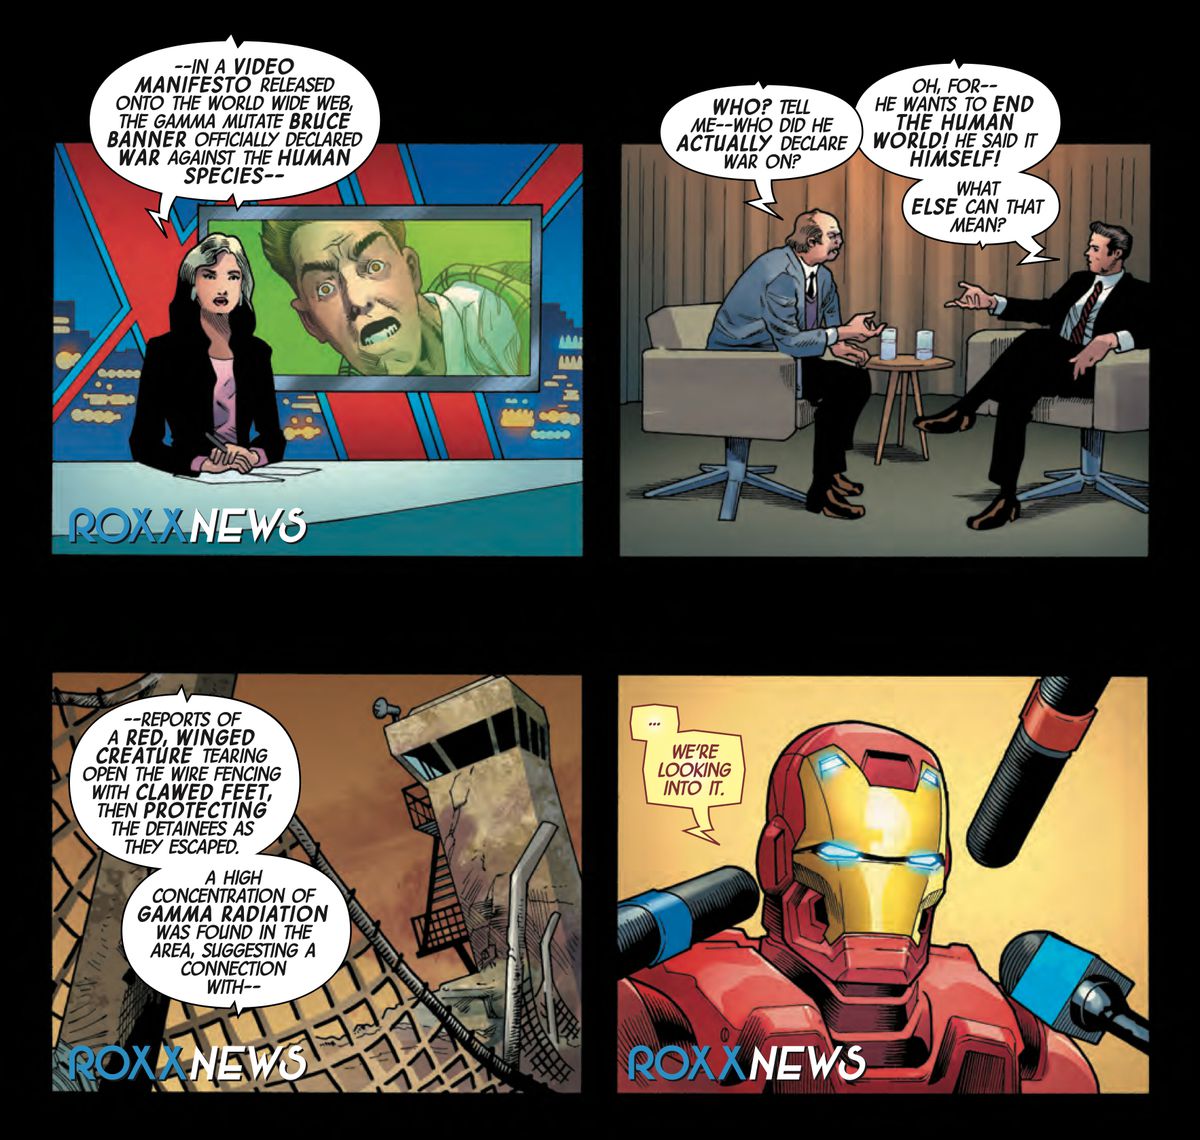 News media react to Bruce Banner’s anti-capitalist manifesto, with three microphones in his face, Iron Man says “...We’re looking into it,” in Immortal Hulk #26, Marvel Comics (2019). 